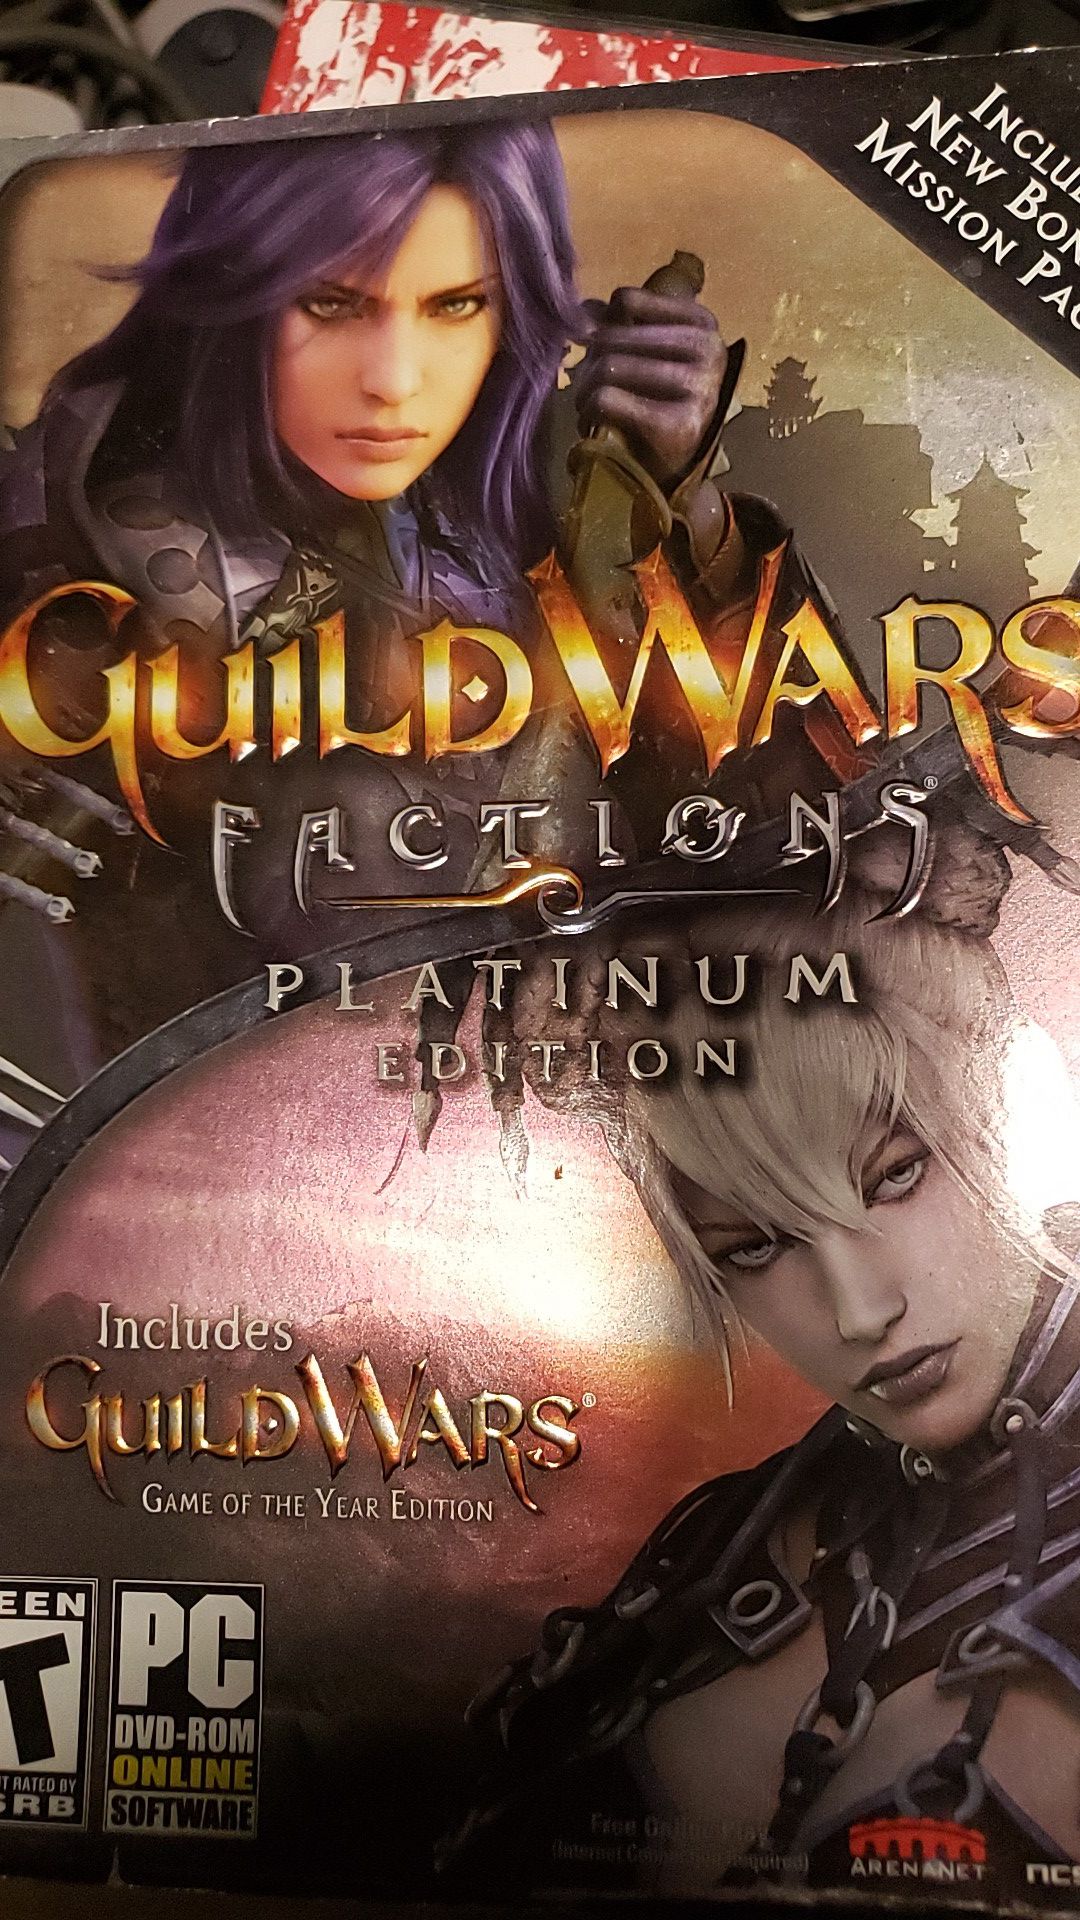 Guild wars pc teen rated